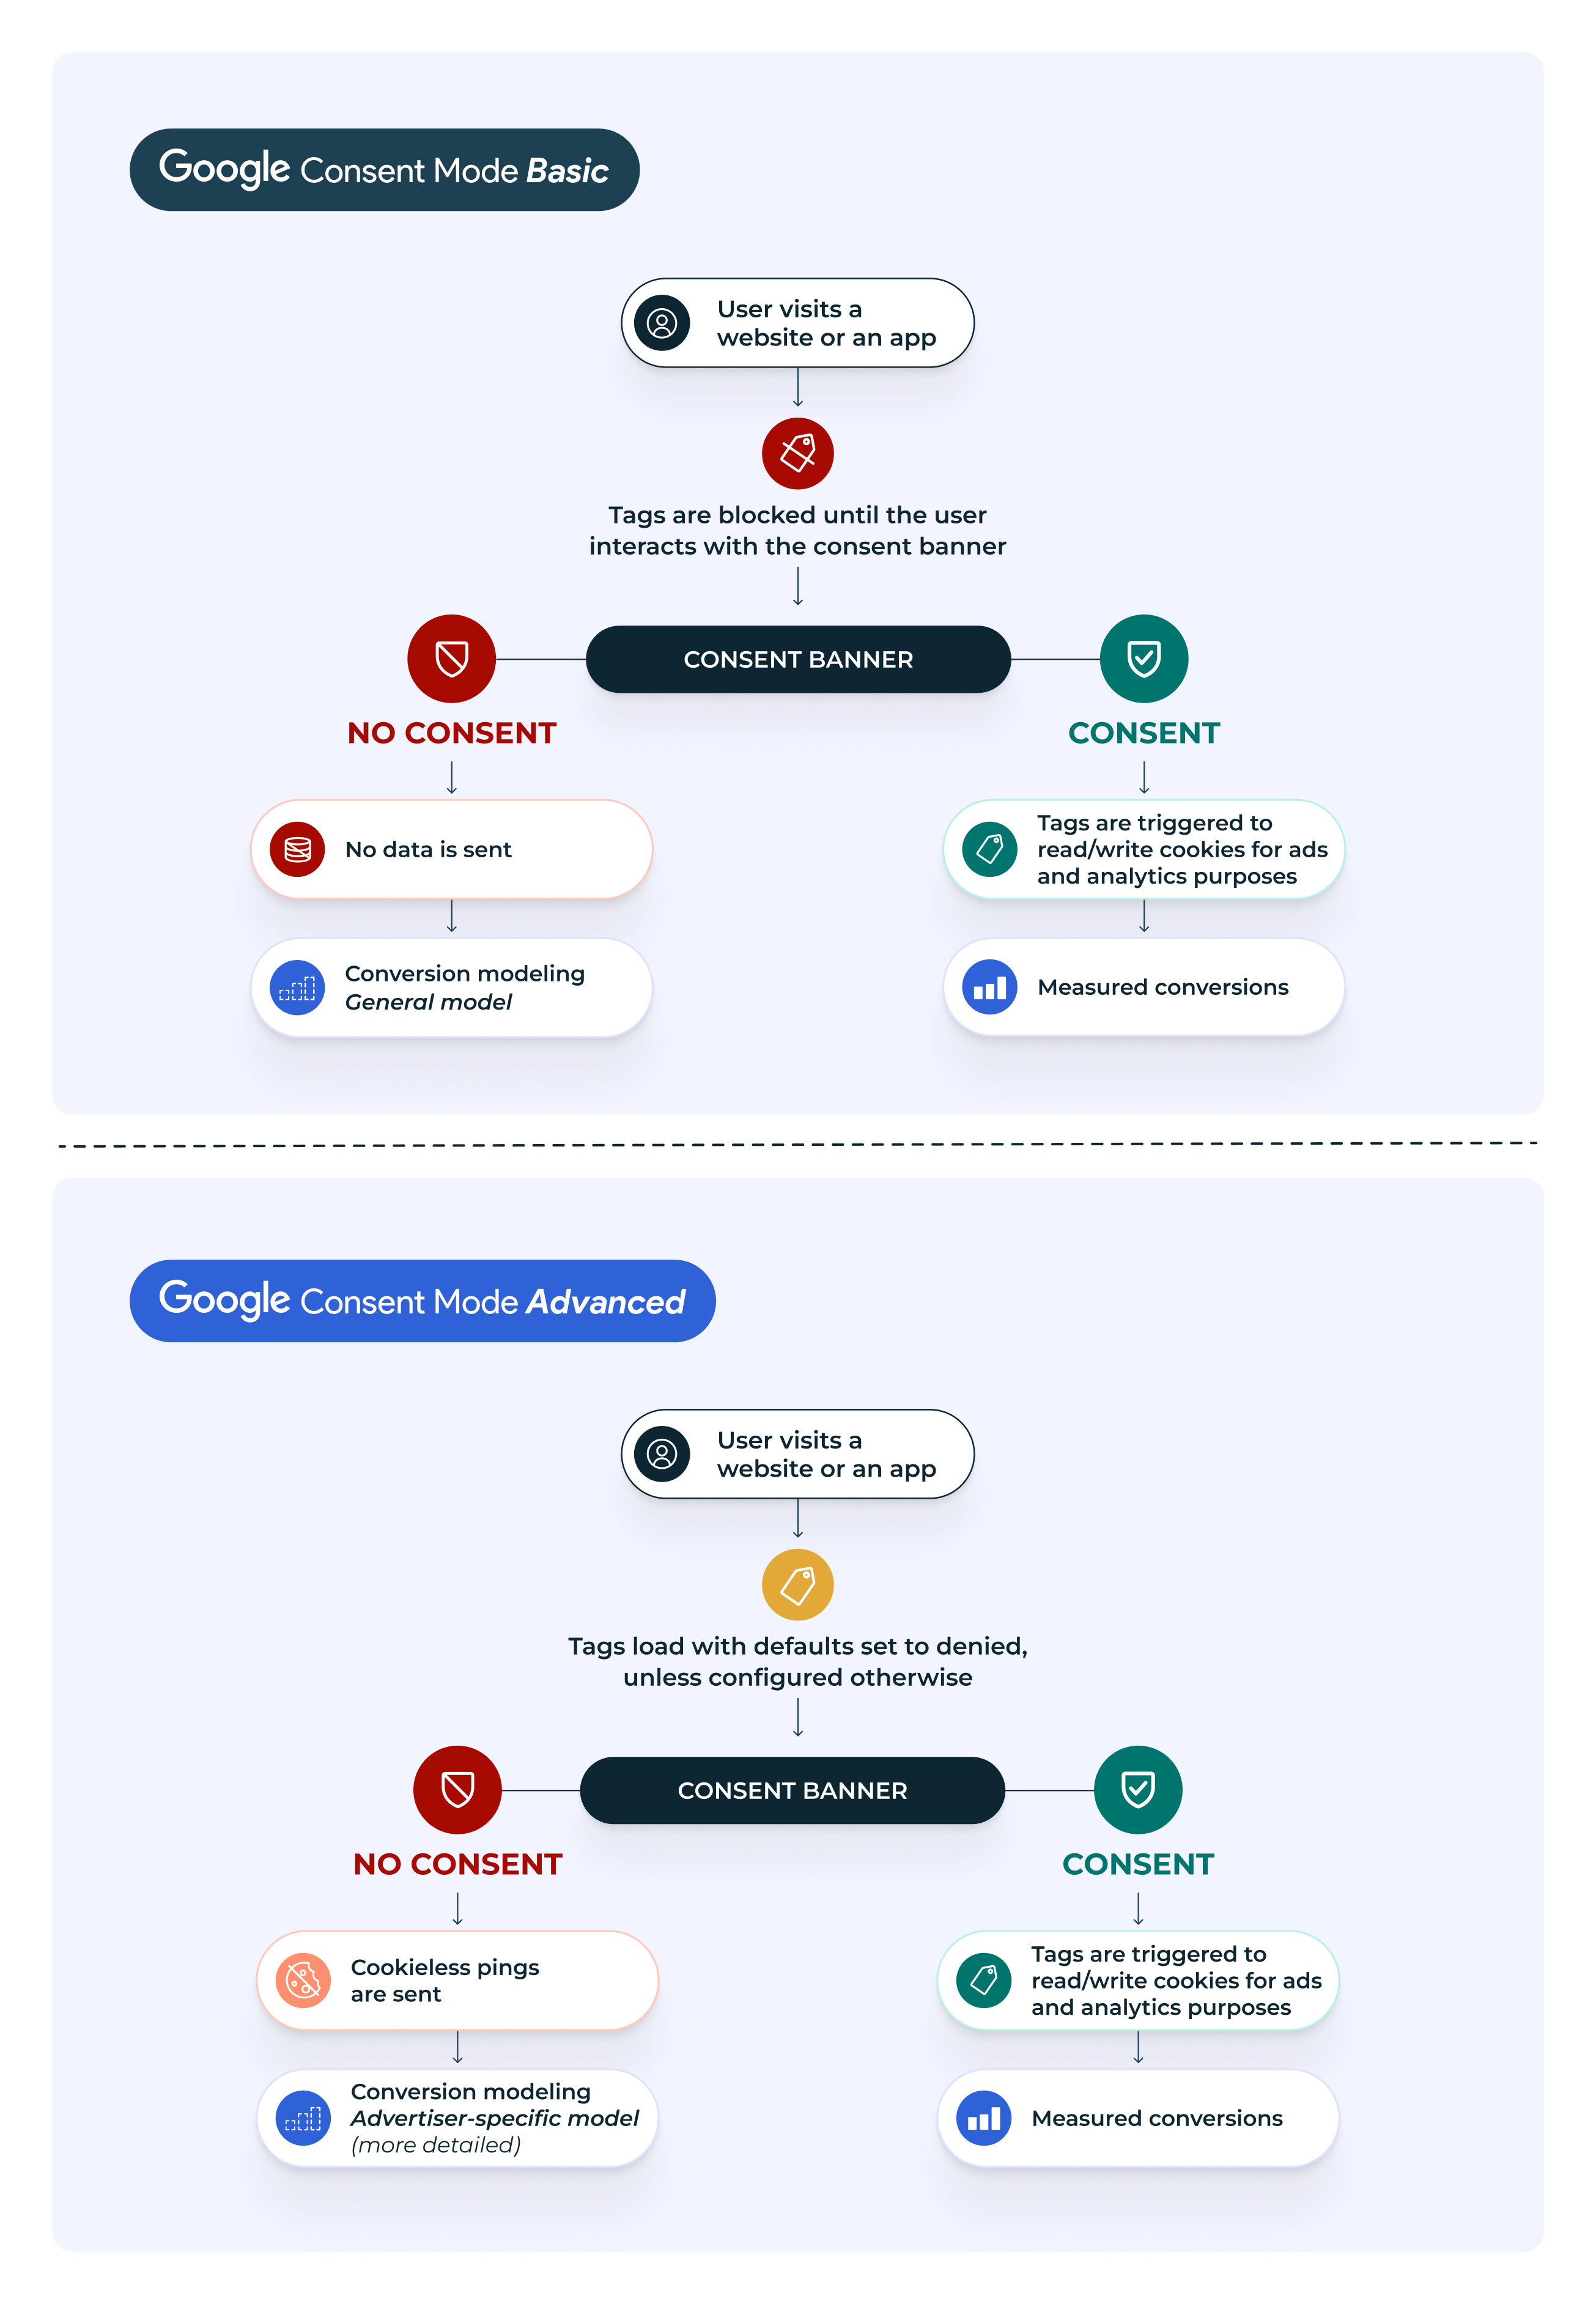 Two diagrams that showcase the way Google Consent Mode V2 works in basic and advanced mode. In Google Consent Mode Basic, tags are blocked until the user interacts with the consent banner. If the user doens't consent, no data is sent, and Google runs conversion modeling using a general model. In Advanced mode, tags load with defaults set to denied, unless configured otherwise before the users interacts with the consent banner. If no consent is granted, cookieless pings are sent and conversion modeling can happen with an advertiser-specific model.